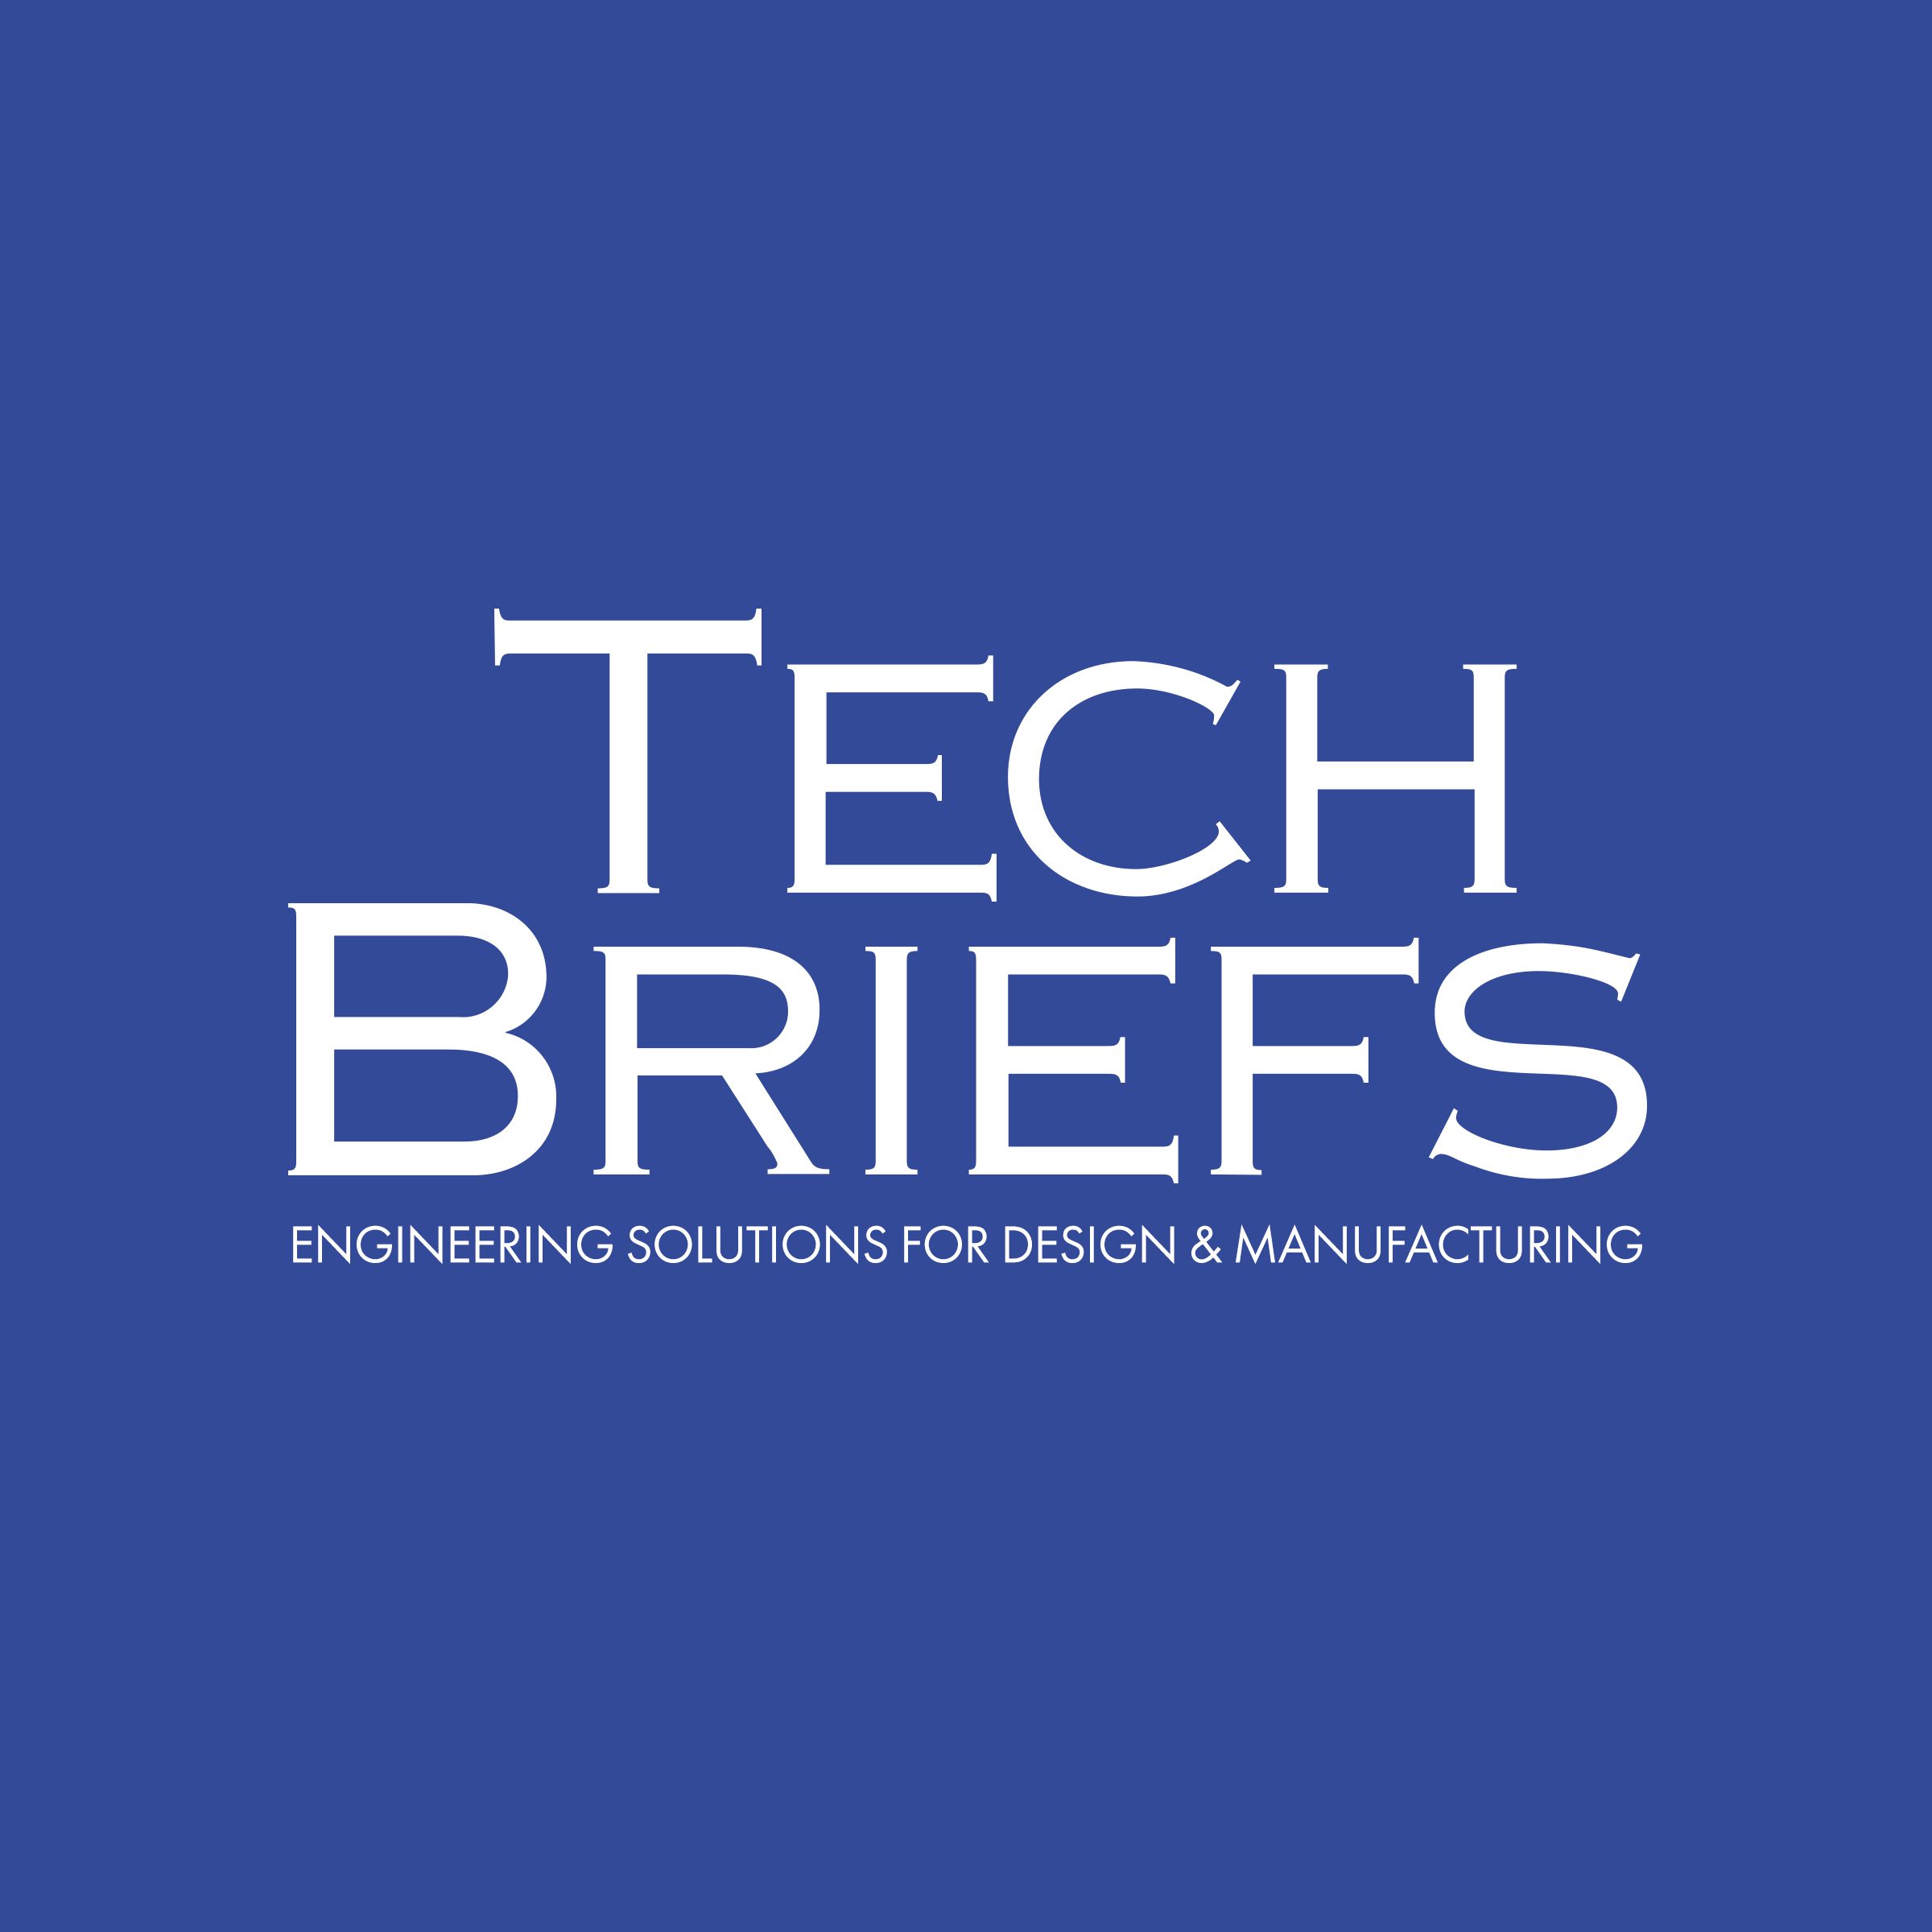 Tech Briefs - Engineering solutions for design and manufacturing